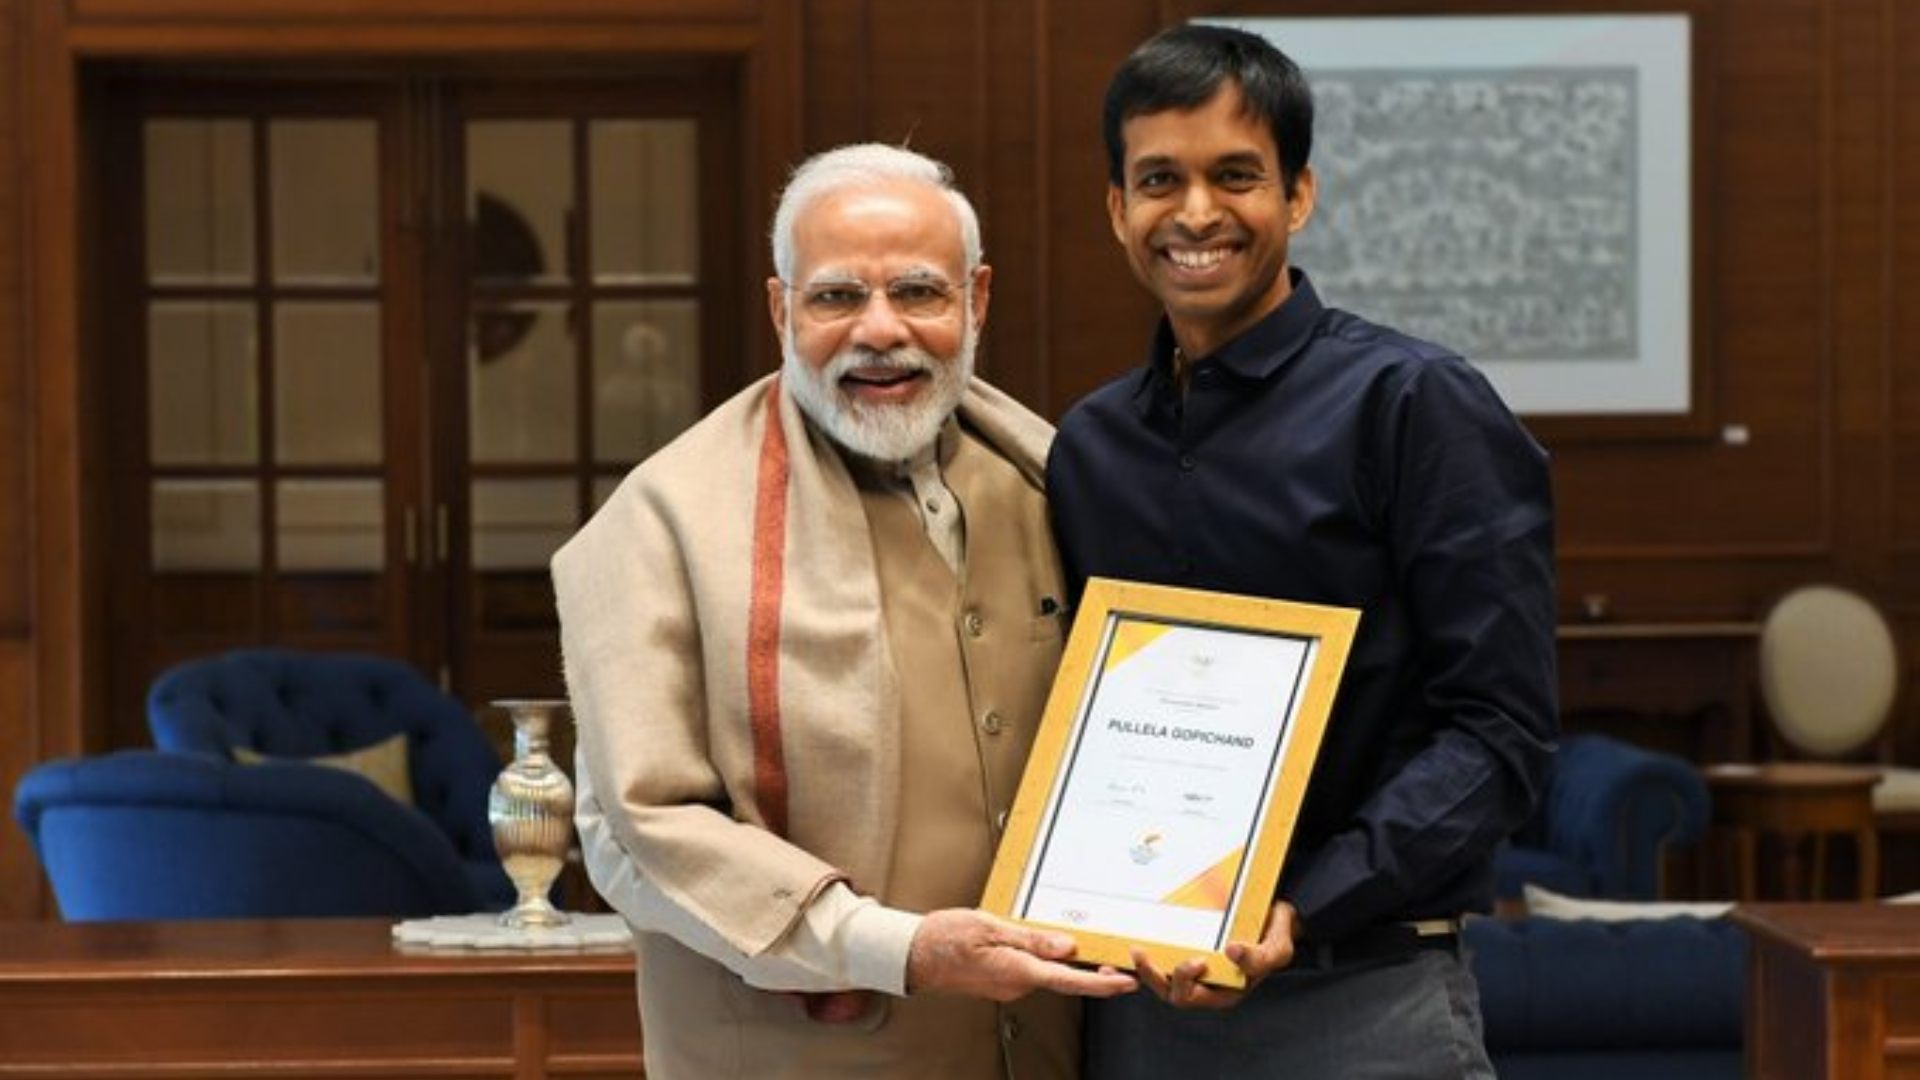 Pullela Gopichand has out Indian badminton on the world map by mentoring champions like PV Sindhu.